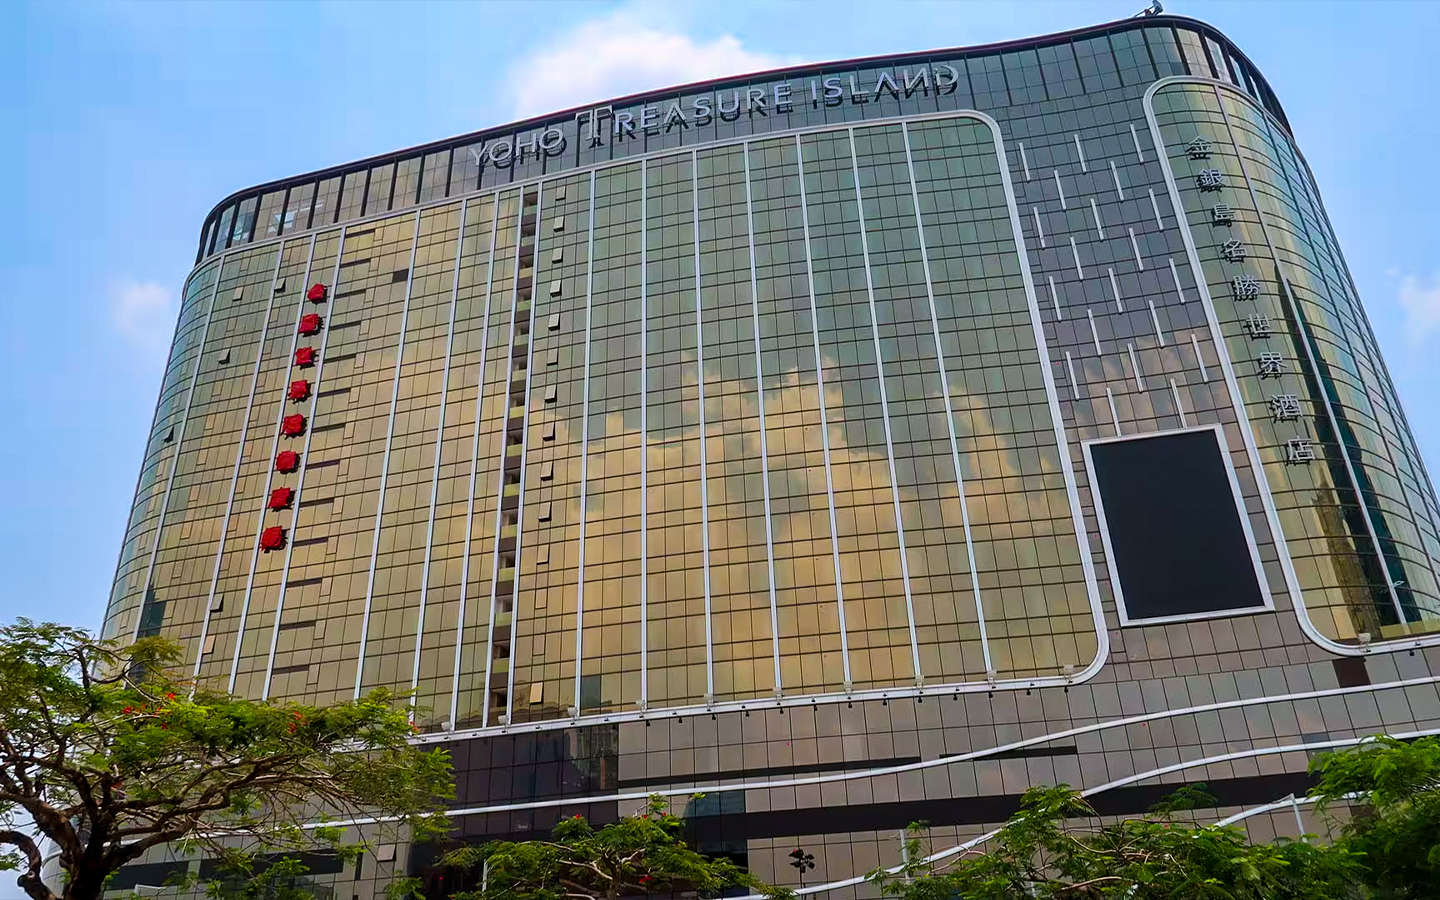 A date has been set for the opening of the Macao peninsula’s biggest shopping mall